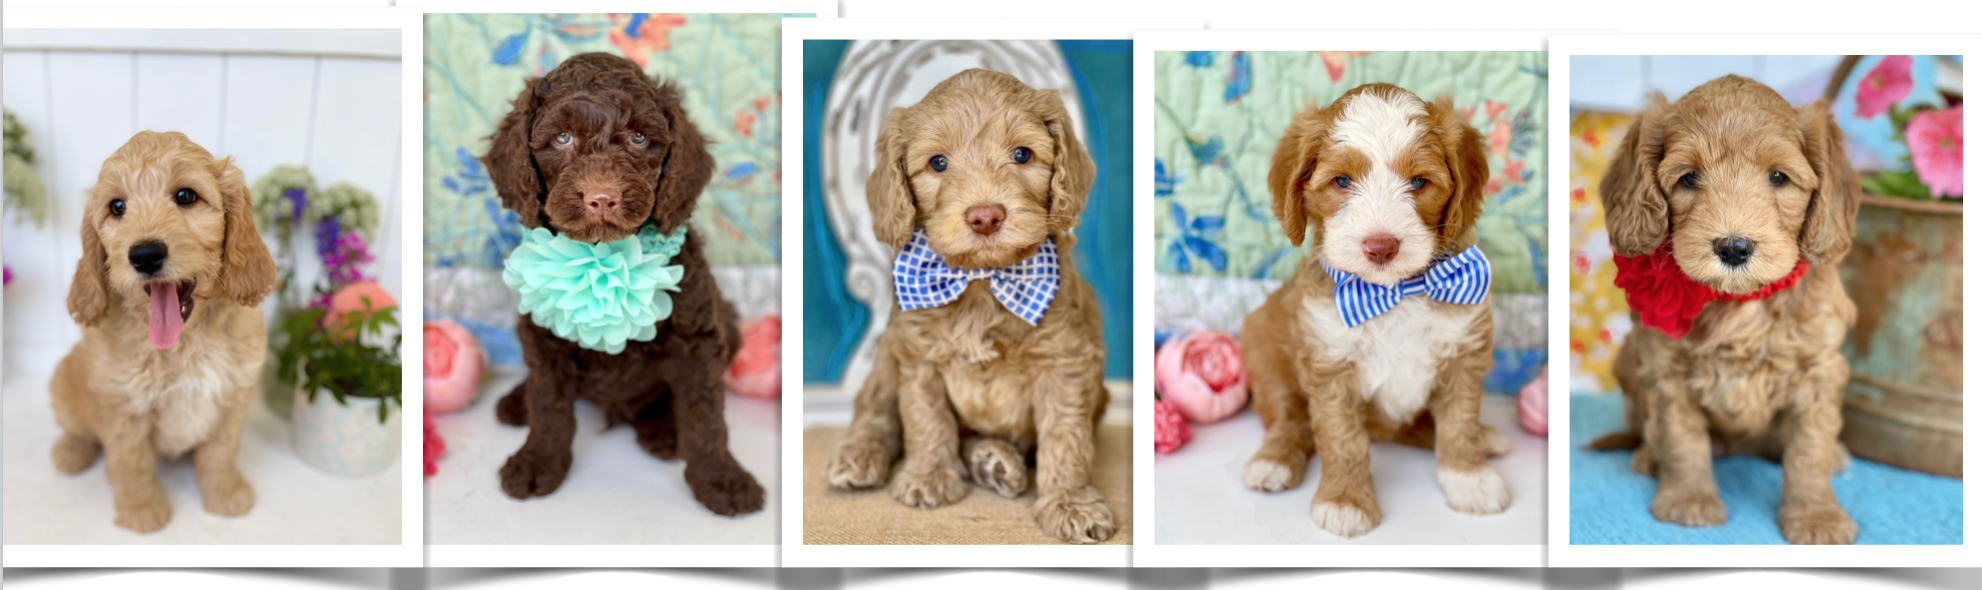 Juneau & Mustang's past mini australian goldendoodle puppies. Tuxedo puppies, chocolate, apricot puppies, blue eyed puppies